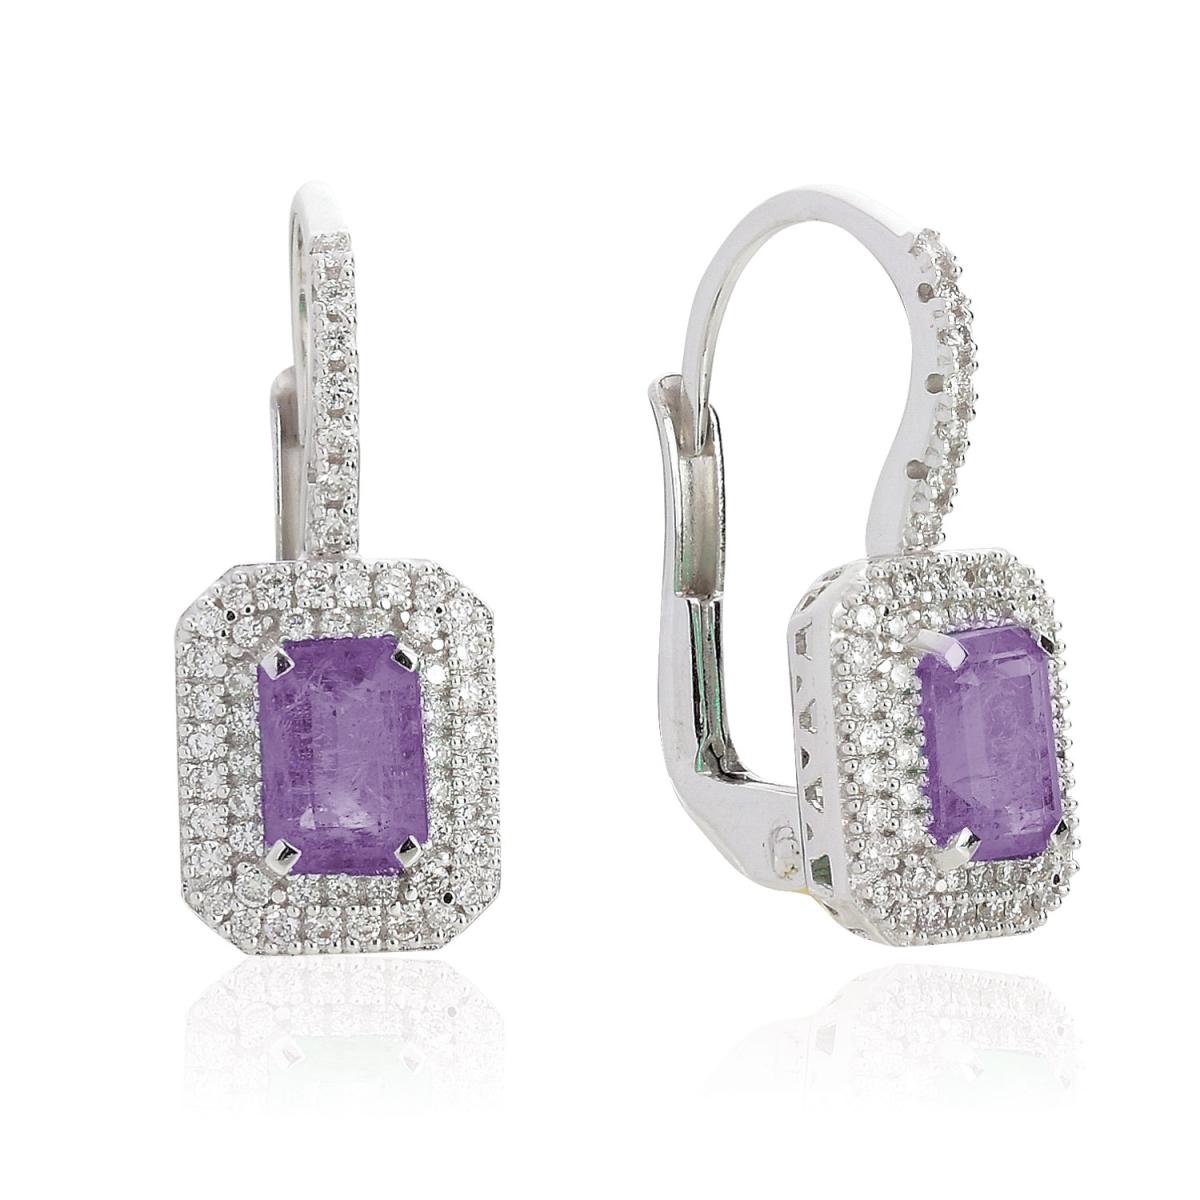 18 kt white gold earrings, with diamonds and central semiprecious stone - OD327/